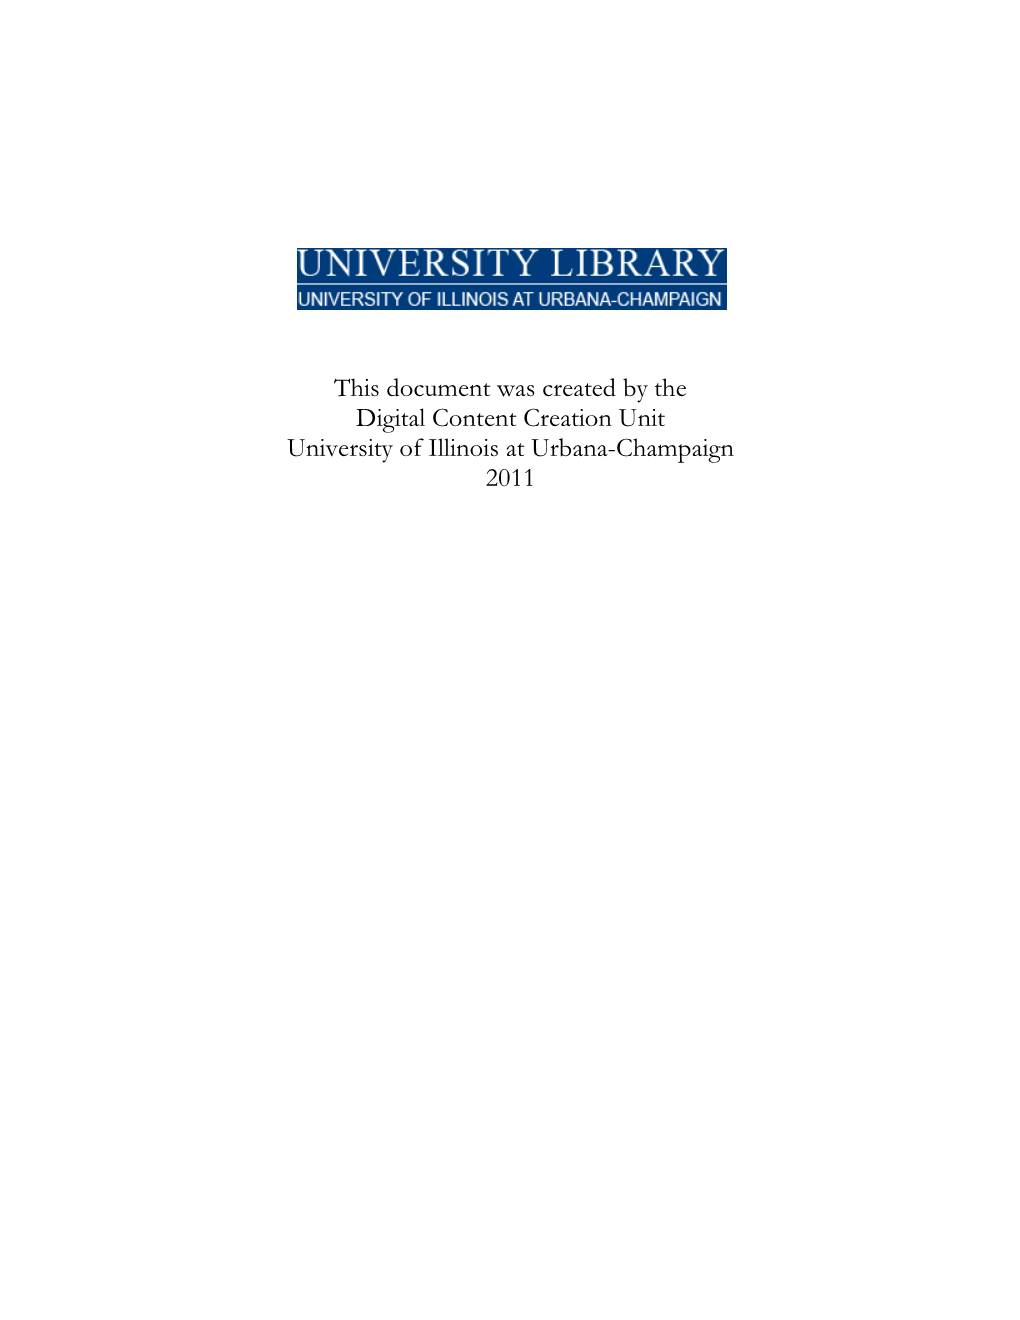 This Document Was Created by the Digital Content Creation Unit University of Illinois at Urbana-Champaign 2011